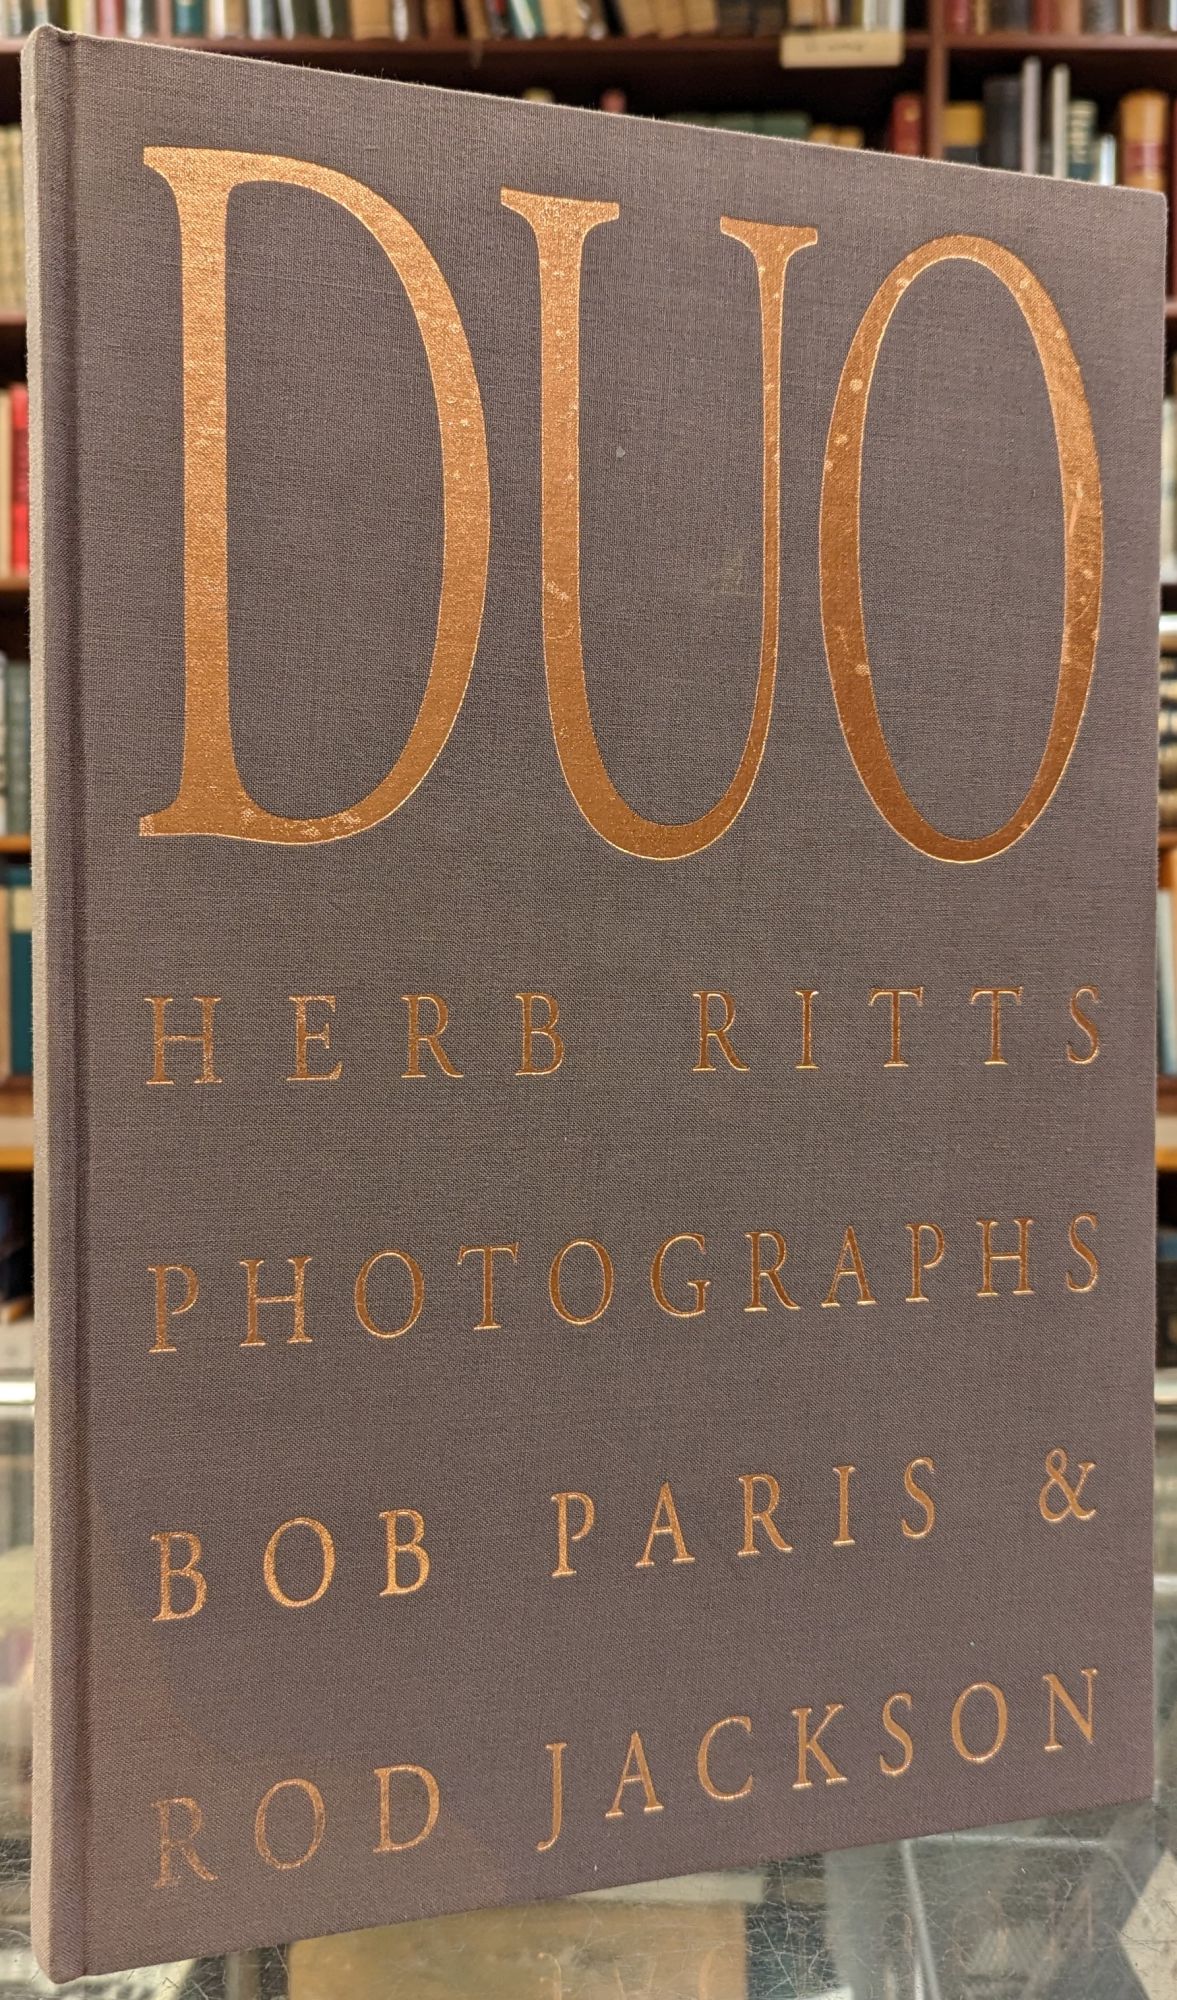 Duo: Bob Paris & Rod Jackson by Herb Ritts on Moe's Books